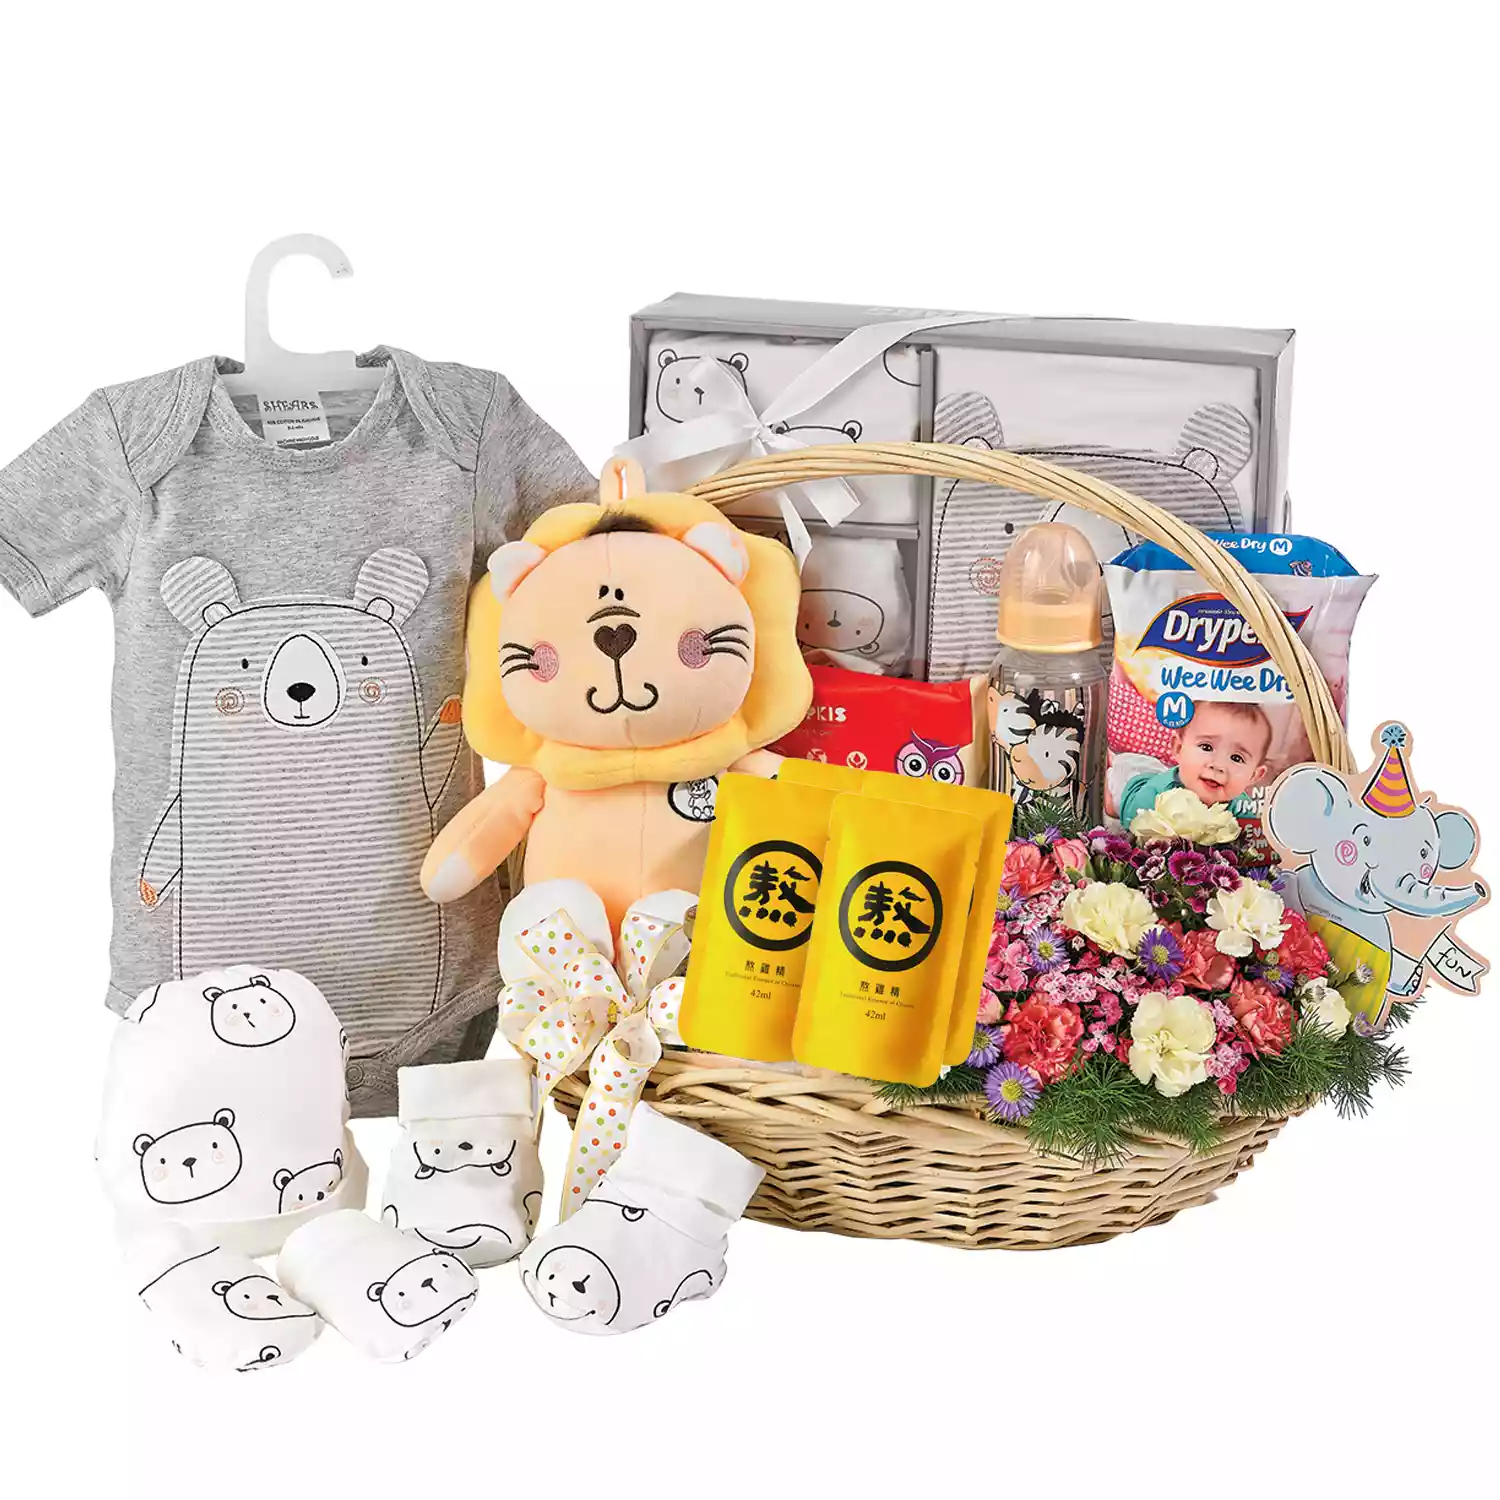 New Mum and Baby Gift Hampers